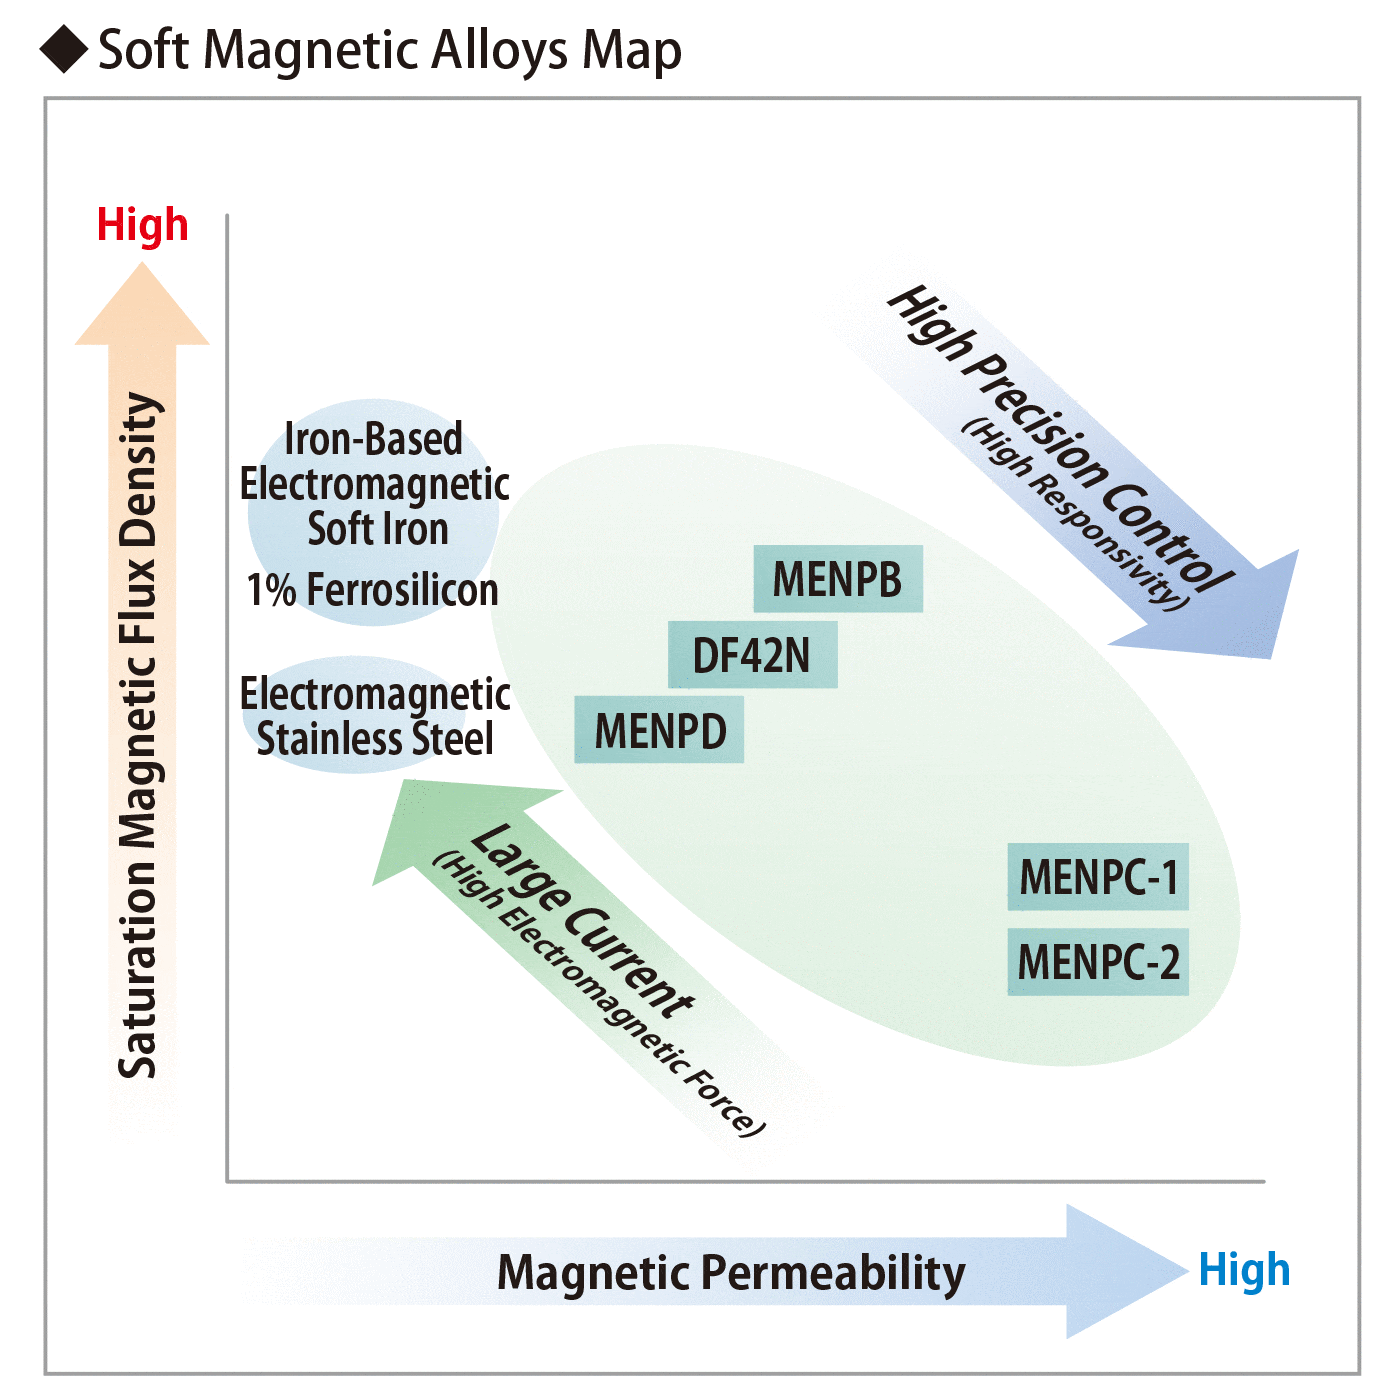 Soft Magnetic Alloys Map